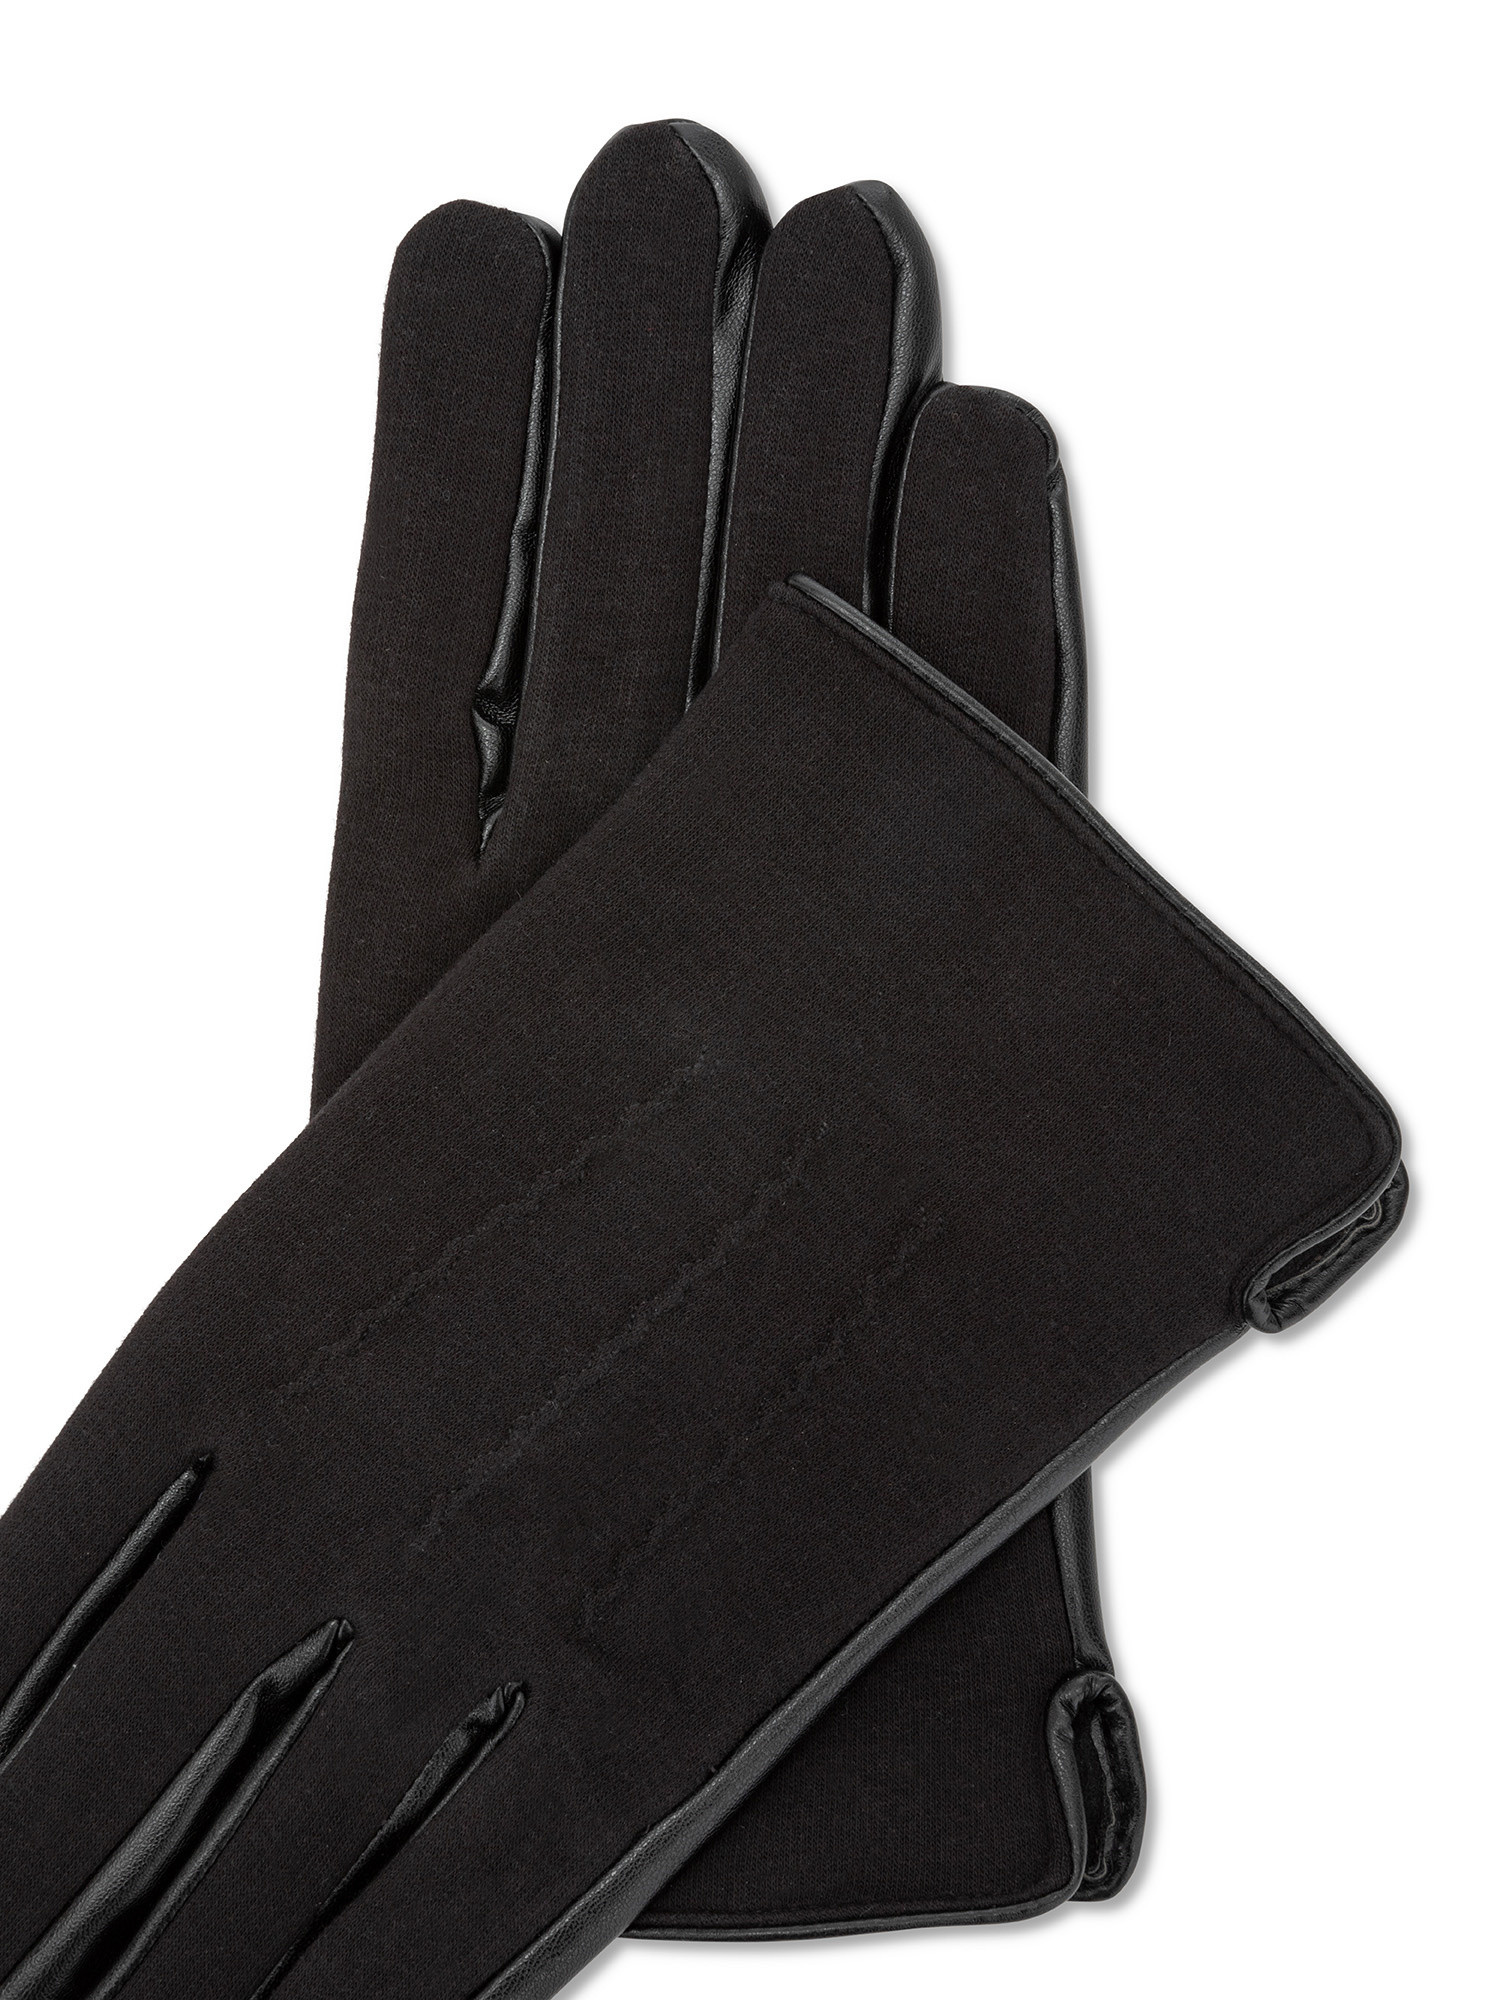 Luca D'Altieri - Gloves in jersey and eco-leather, Black, large image number 1